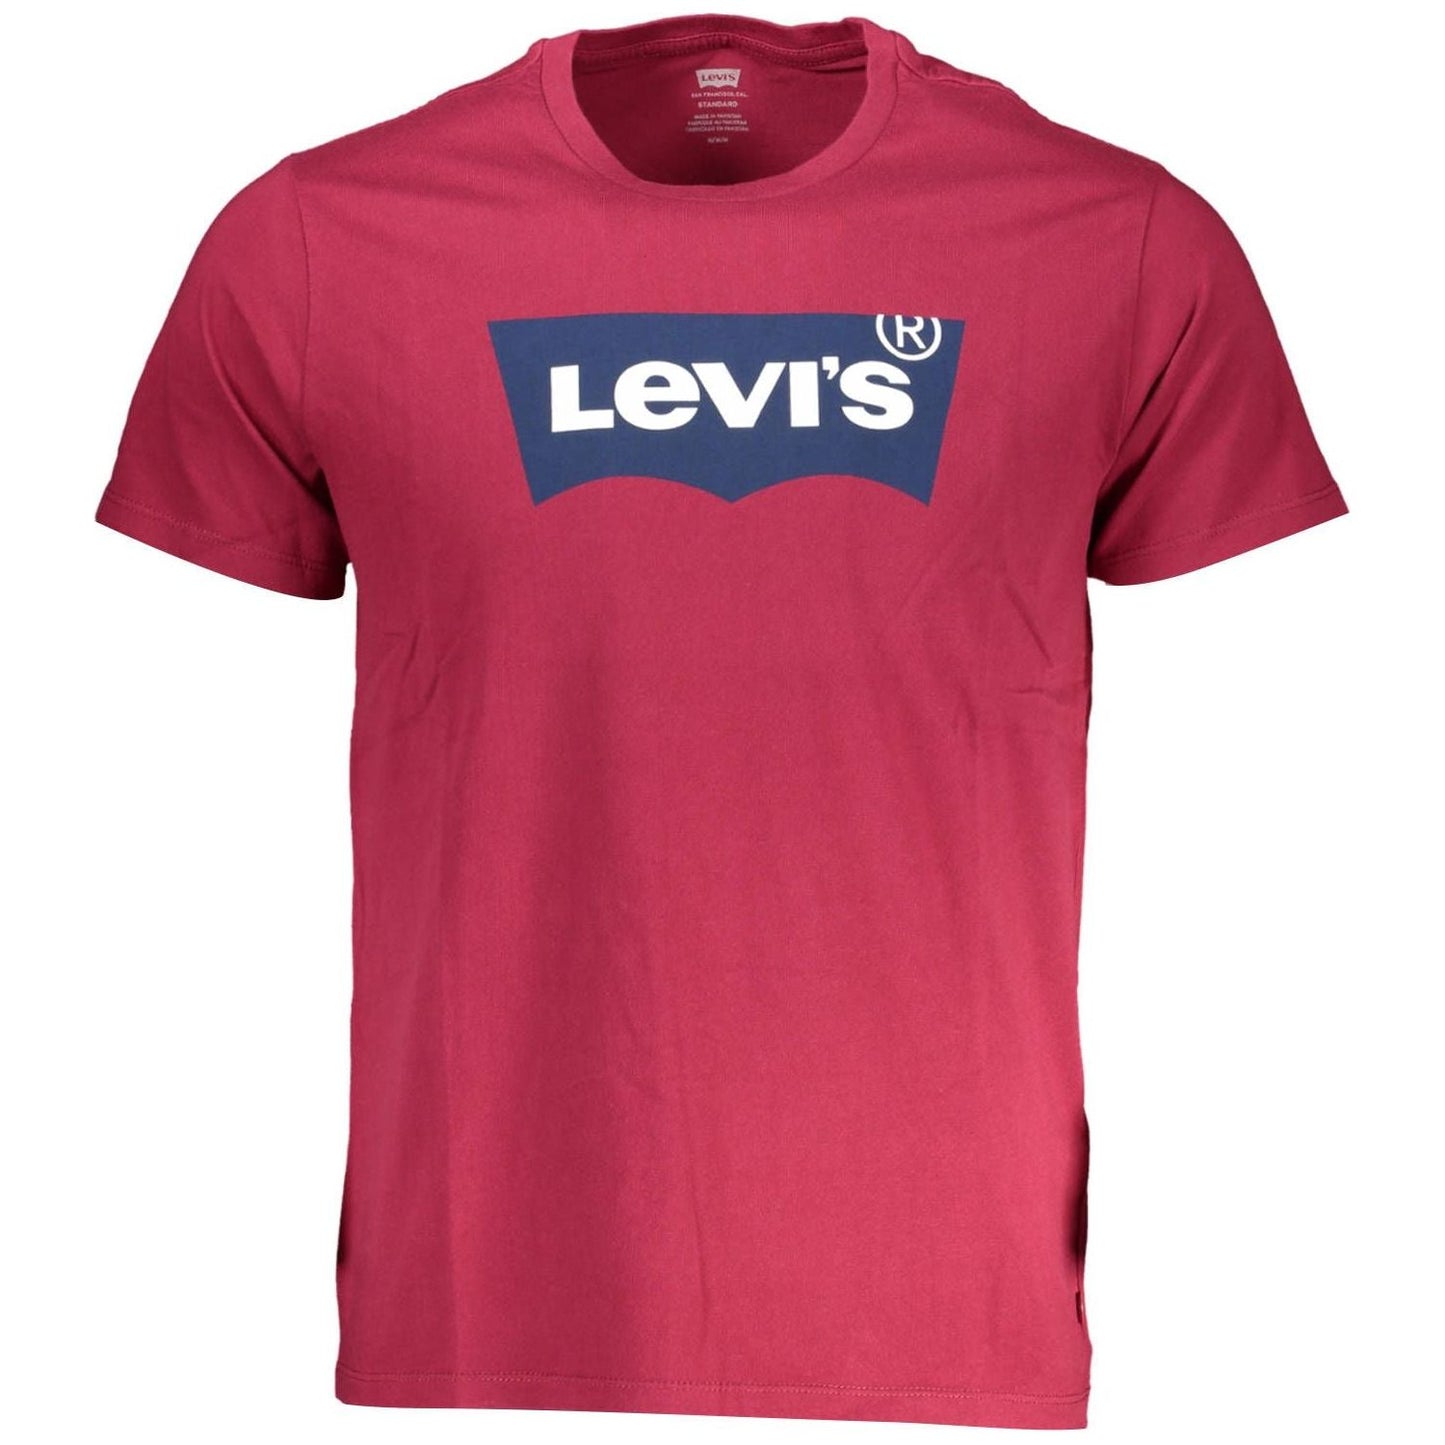 Levi's Classic Red Cotton Tee with Iconic Logo classic-red-cotton-tee-with-iconic-logo